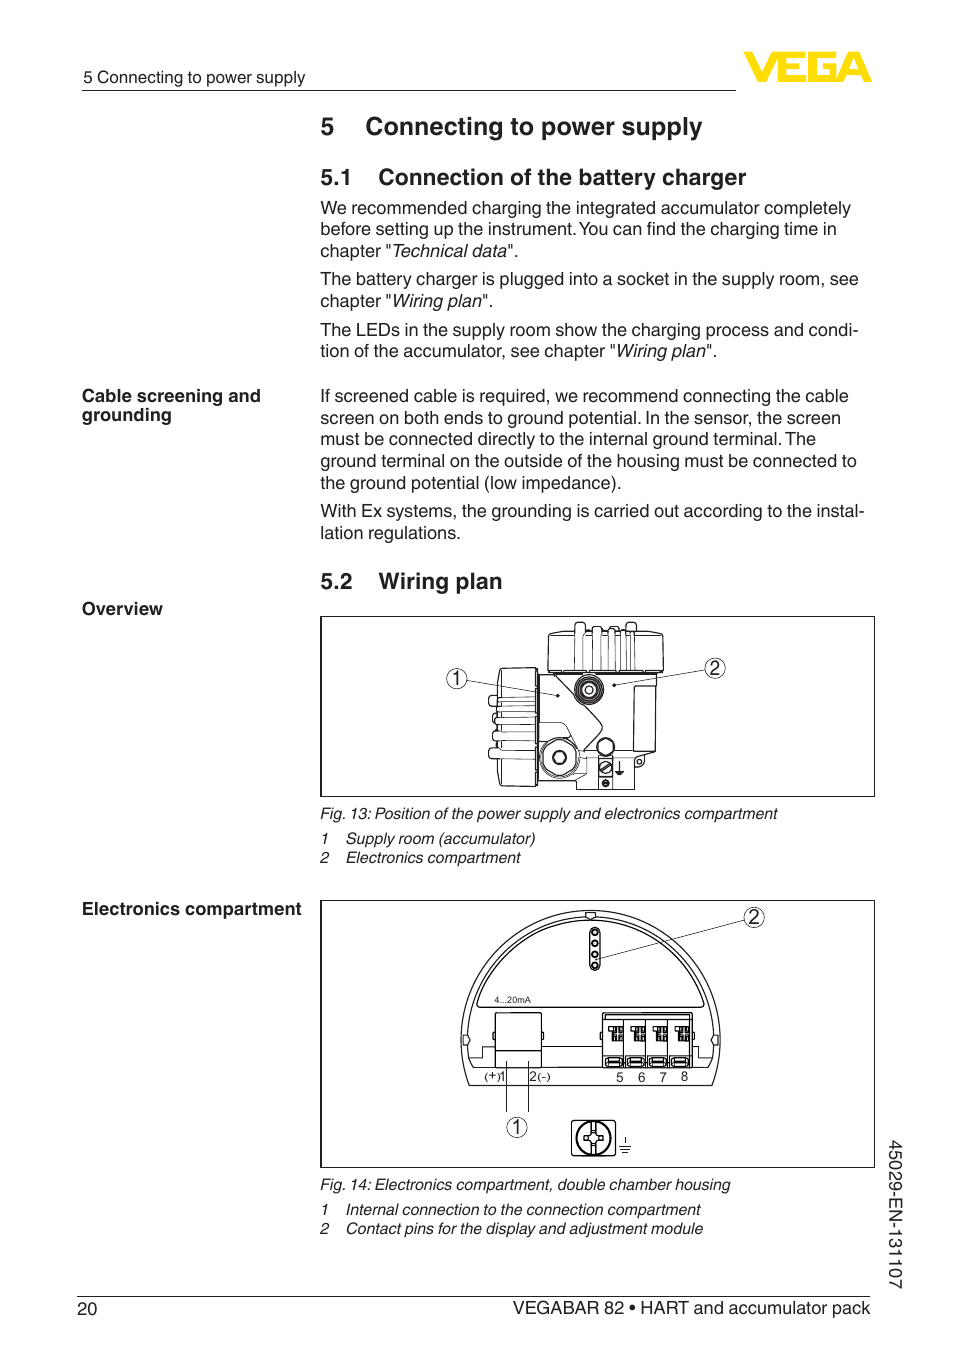 5 connecting to power supply, 1 connection of the battery charger, 2 wiring  plan | VEGA VEGABAR 82 HART and accumulator pack - Operating Instructions  User Manual | Page 20 / 72 | Original mode